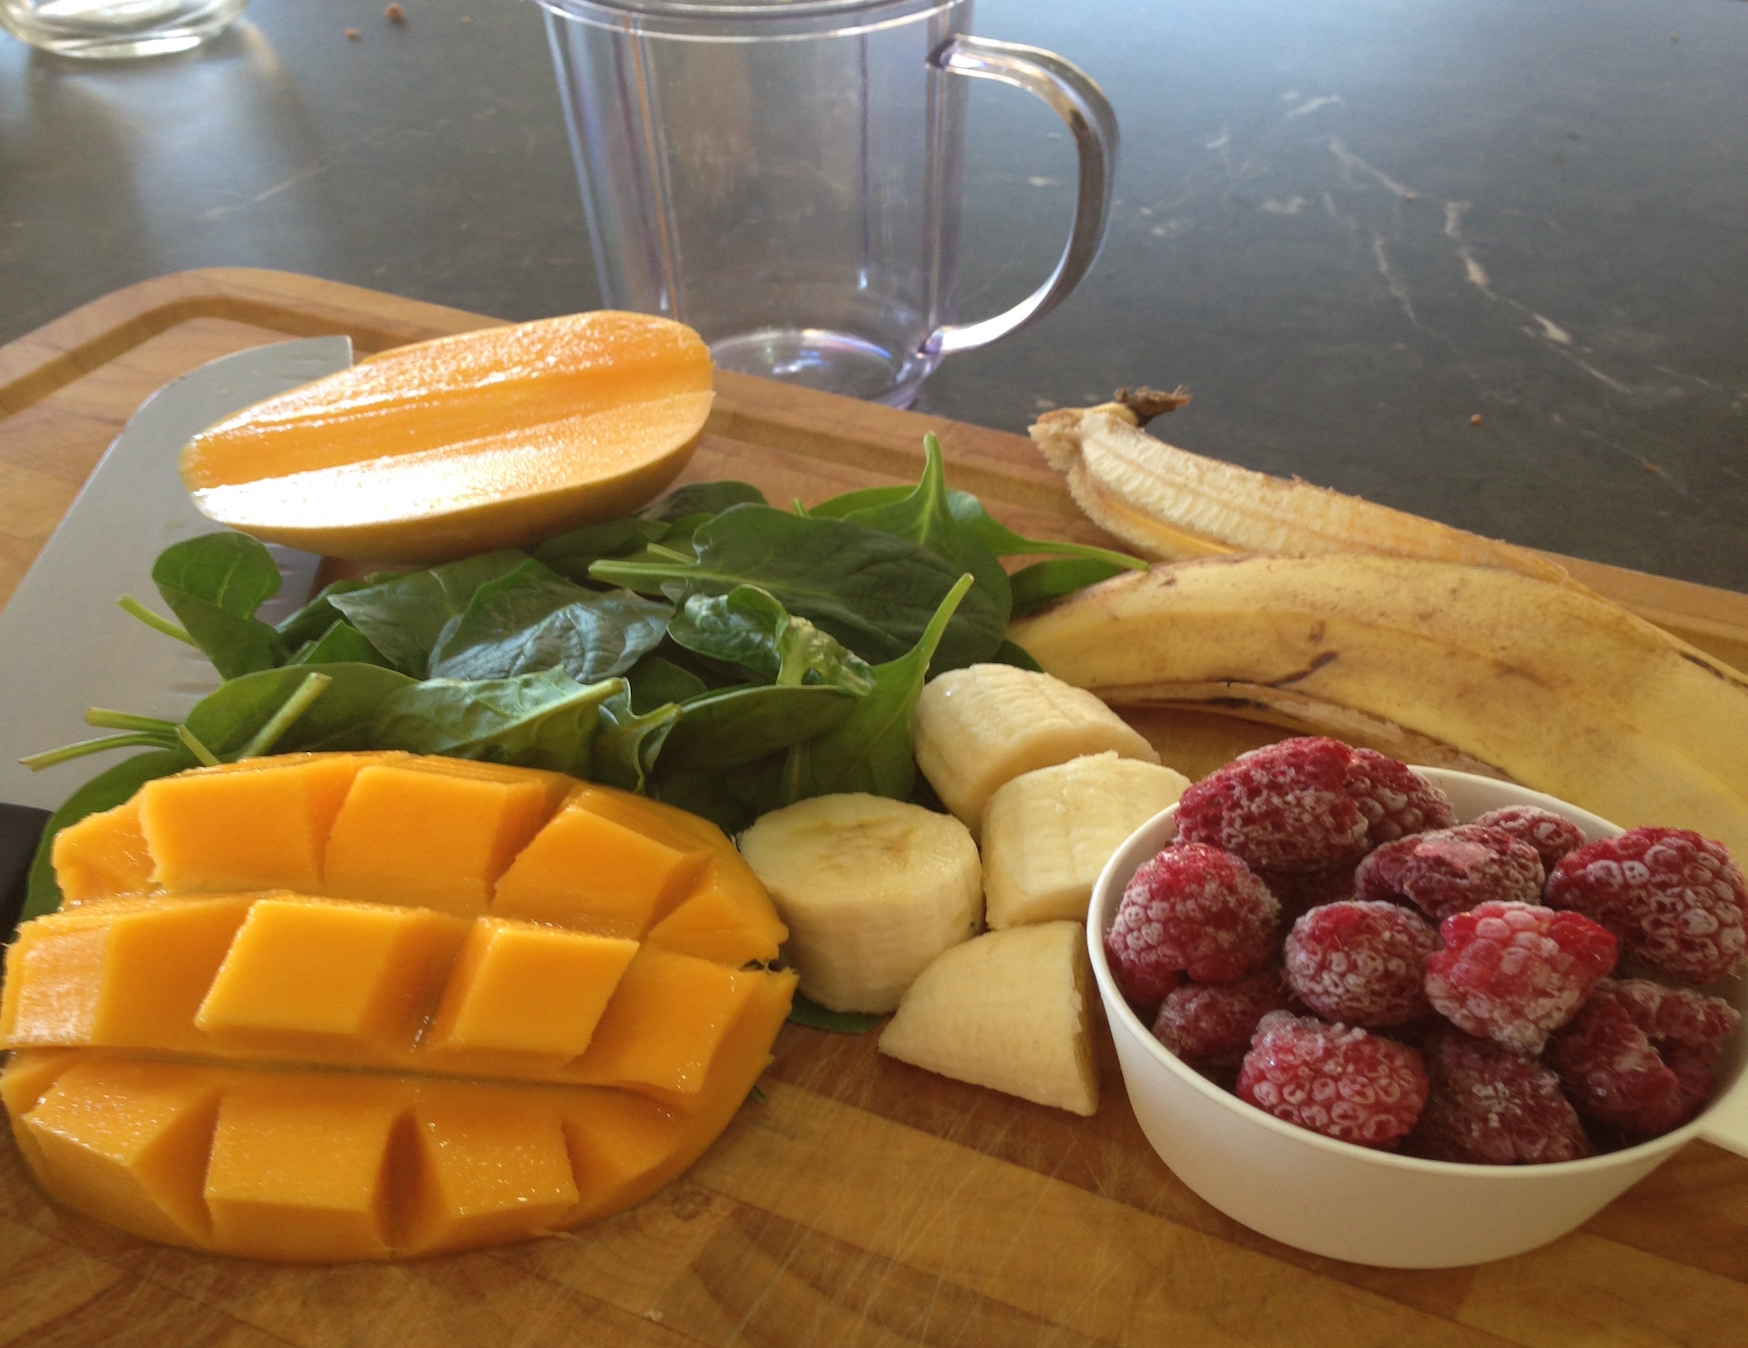 Green smoothie  ingredients on a chopping board